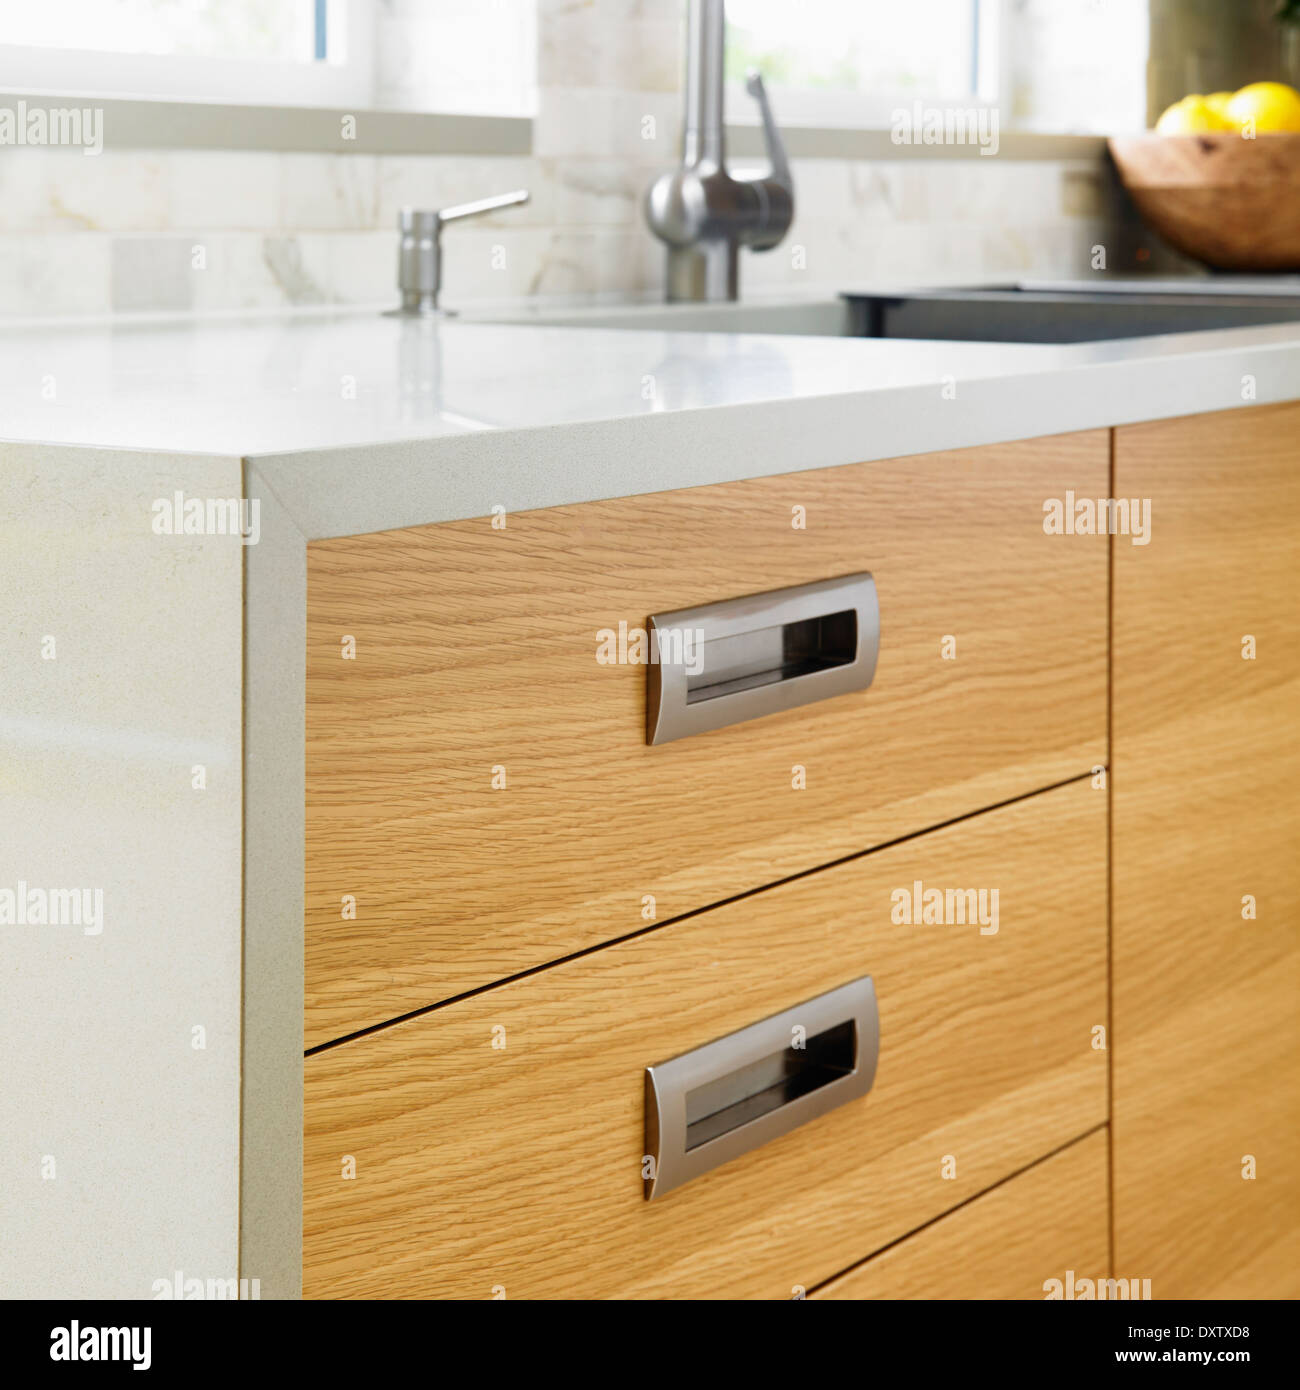 Detail Of Edge Grain Oak Cabinets With Modern Stainless Steel